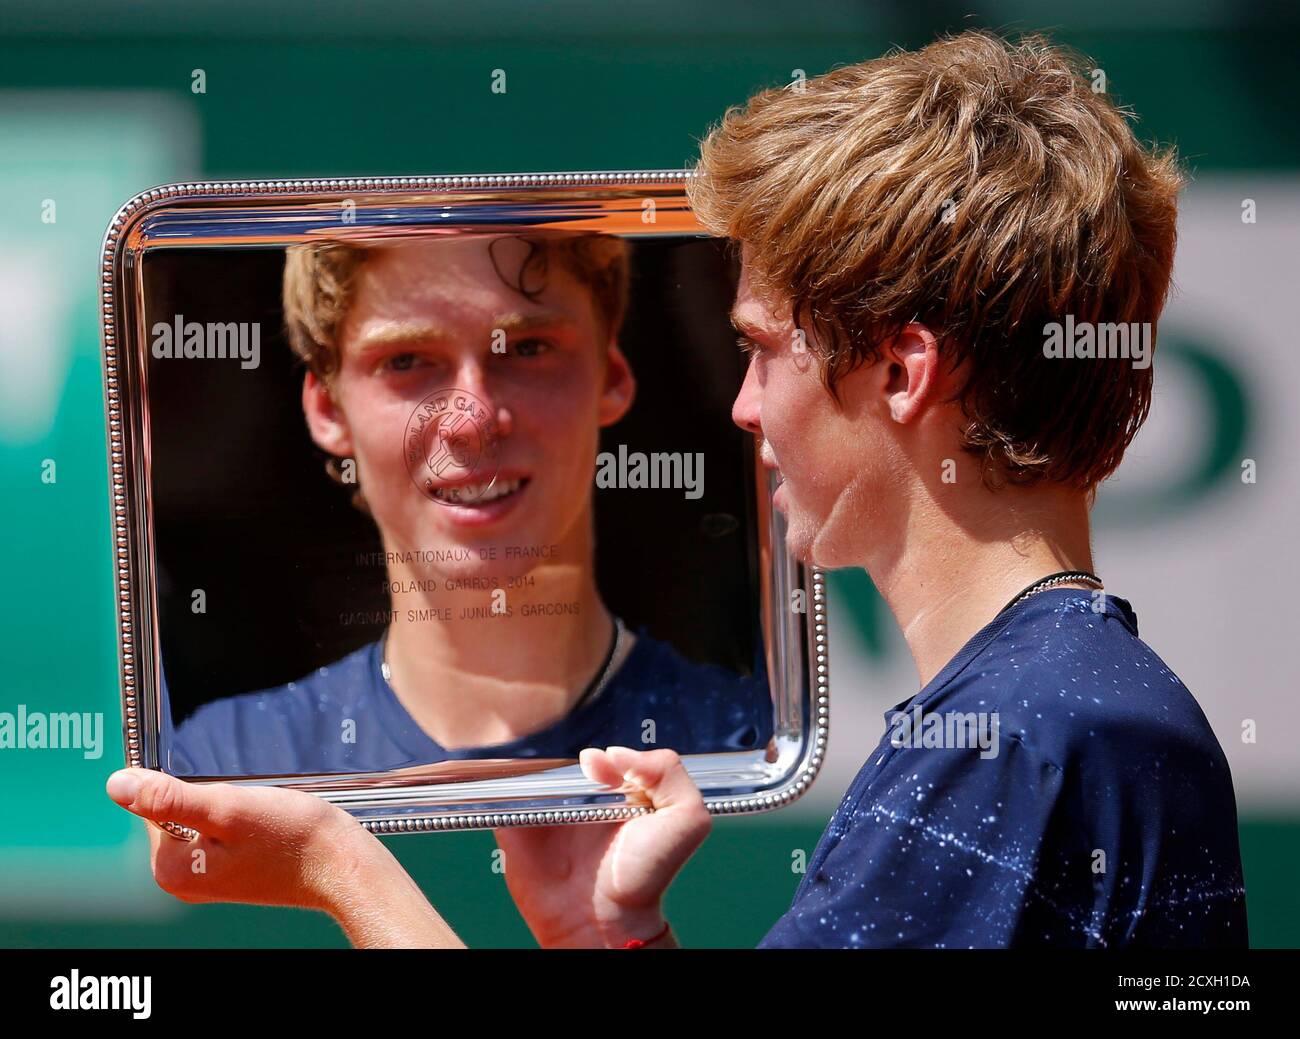 Andrey Rublev of Russia poses with the trophy after winning the junior boys  final against Jaume Antoni Munar Clar of Spain during the French Open  tennis tournament at the Roland Garros stadium